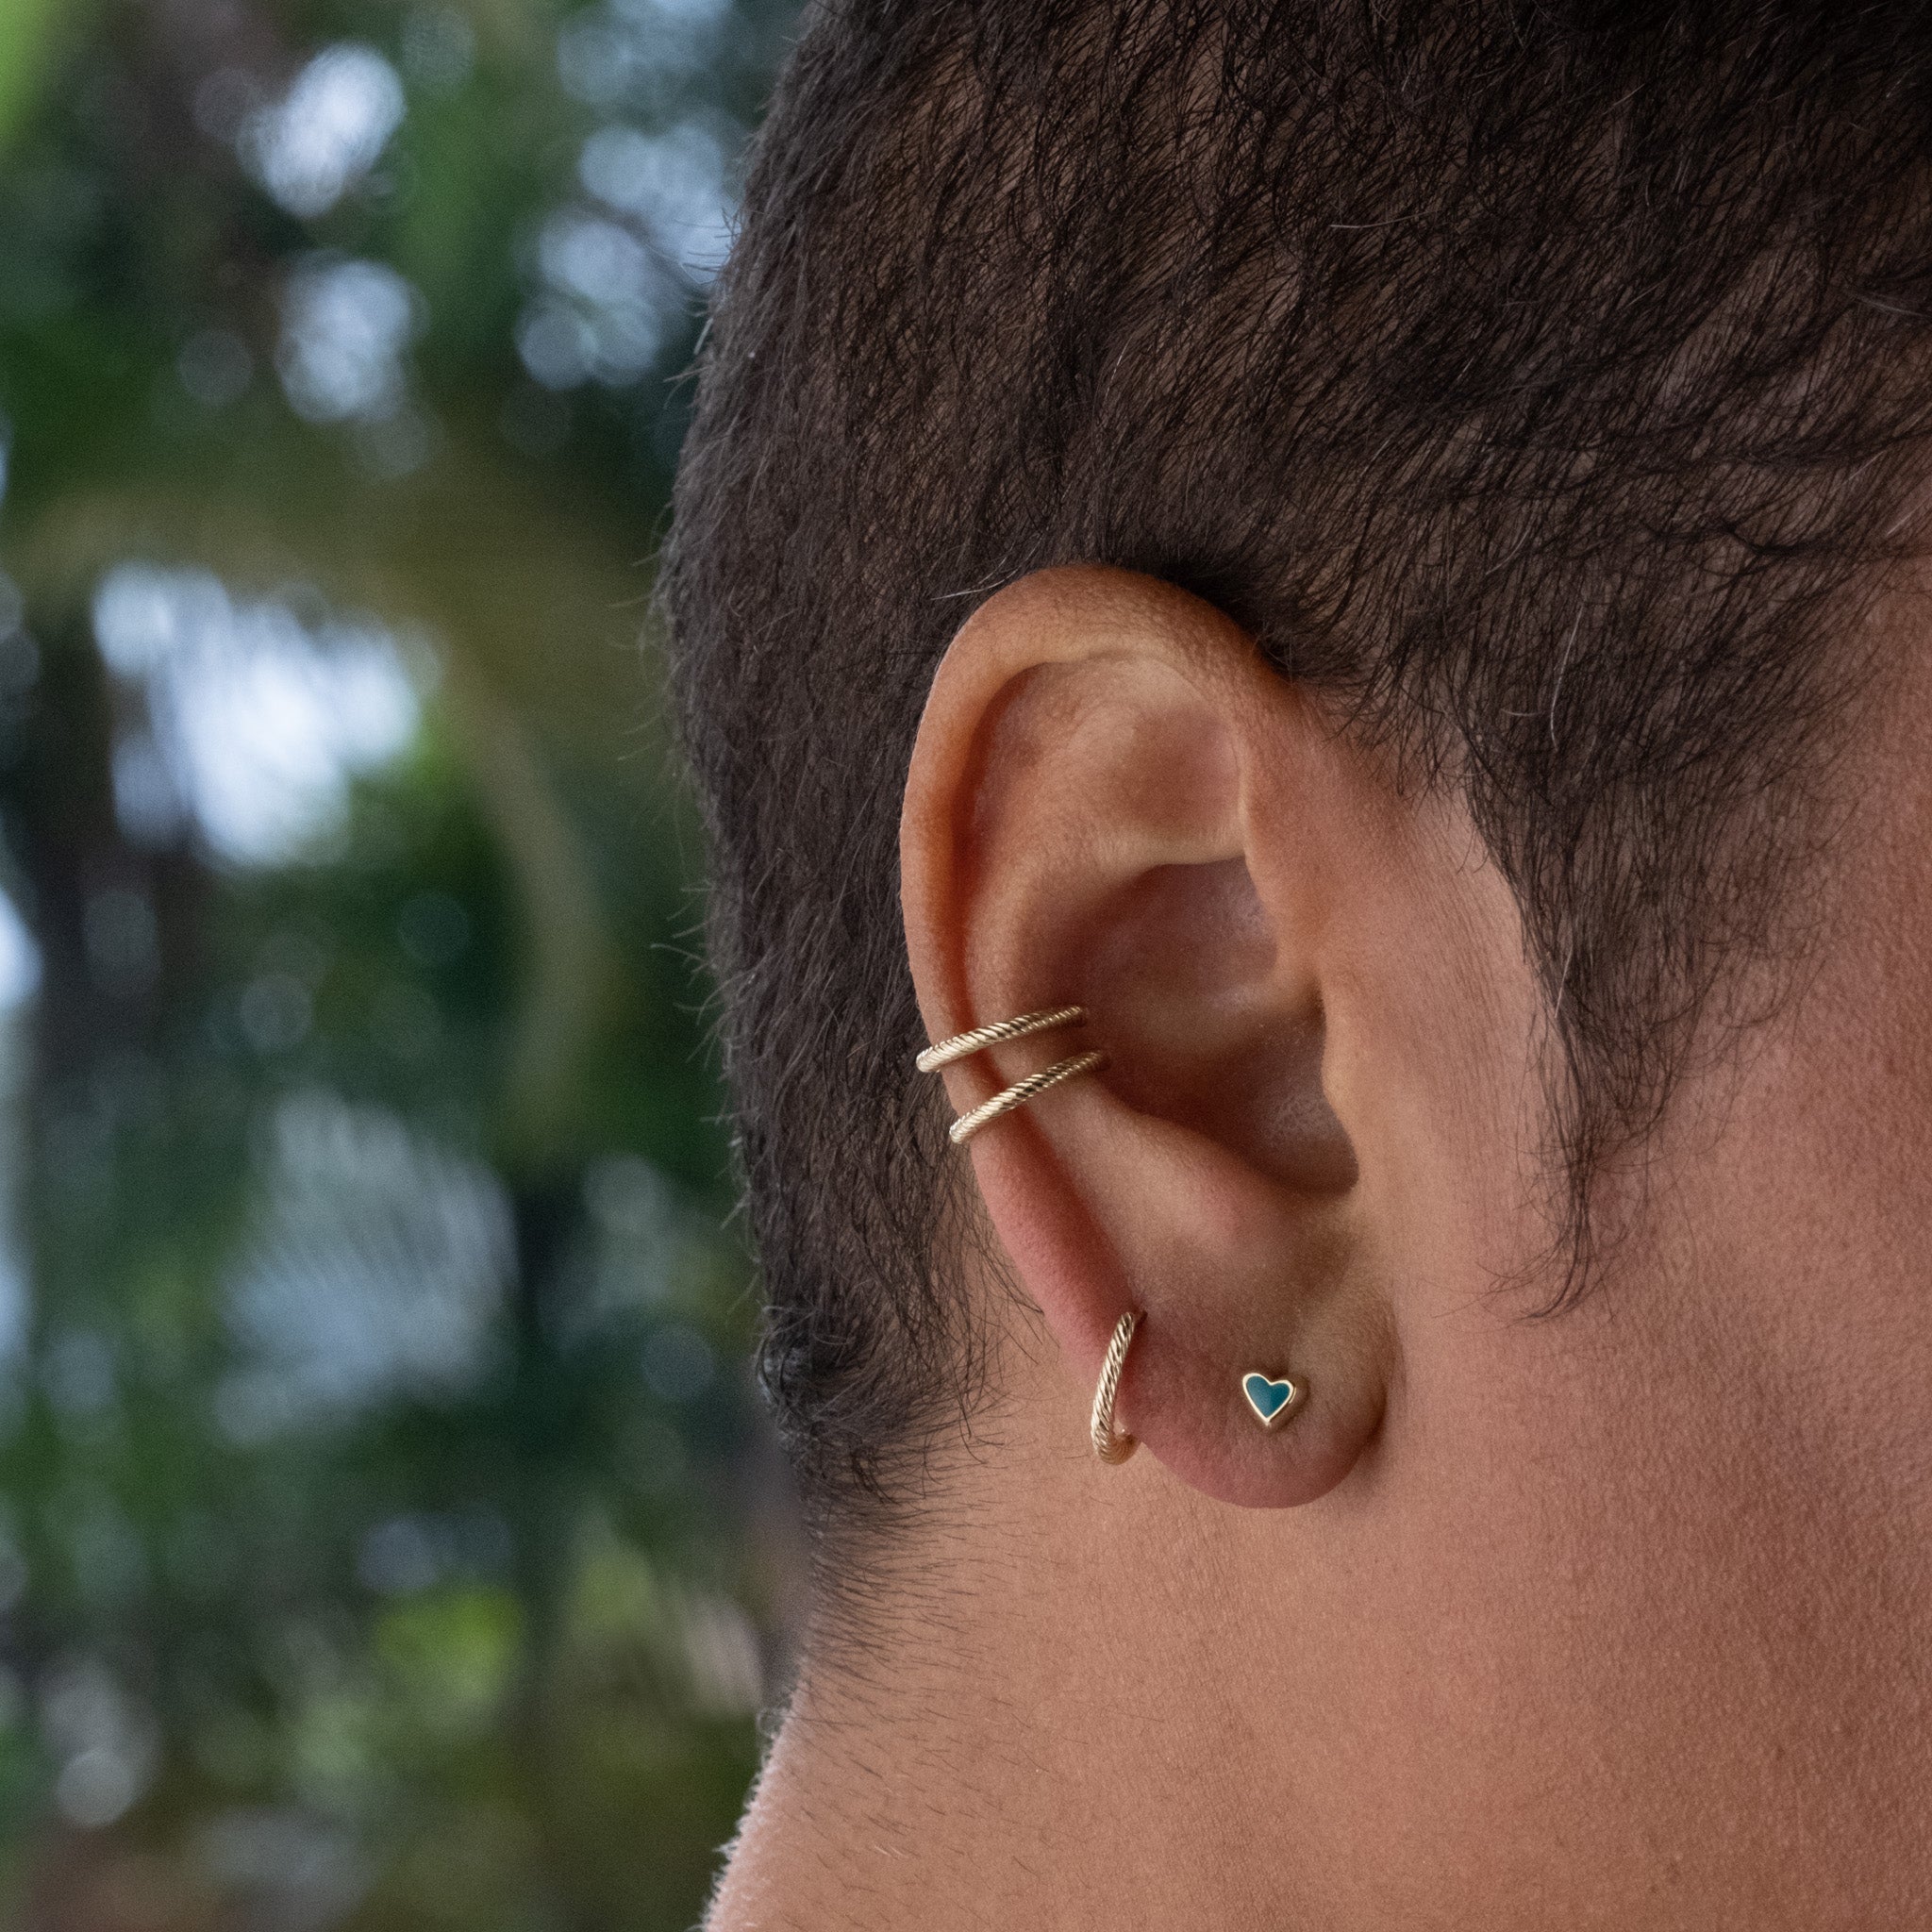 a close up of a person with an Aiden Jae Banyan Huggie ear piercing.